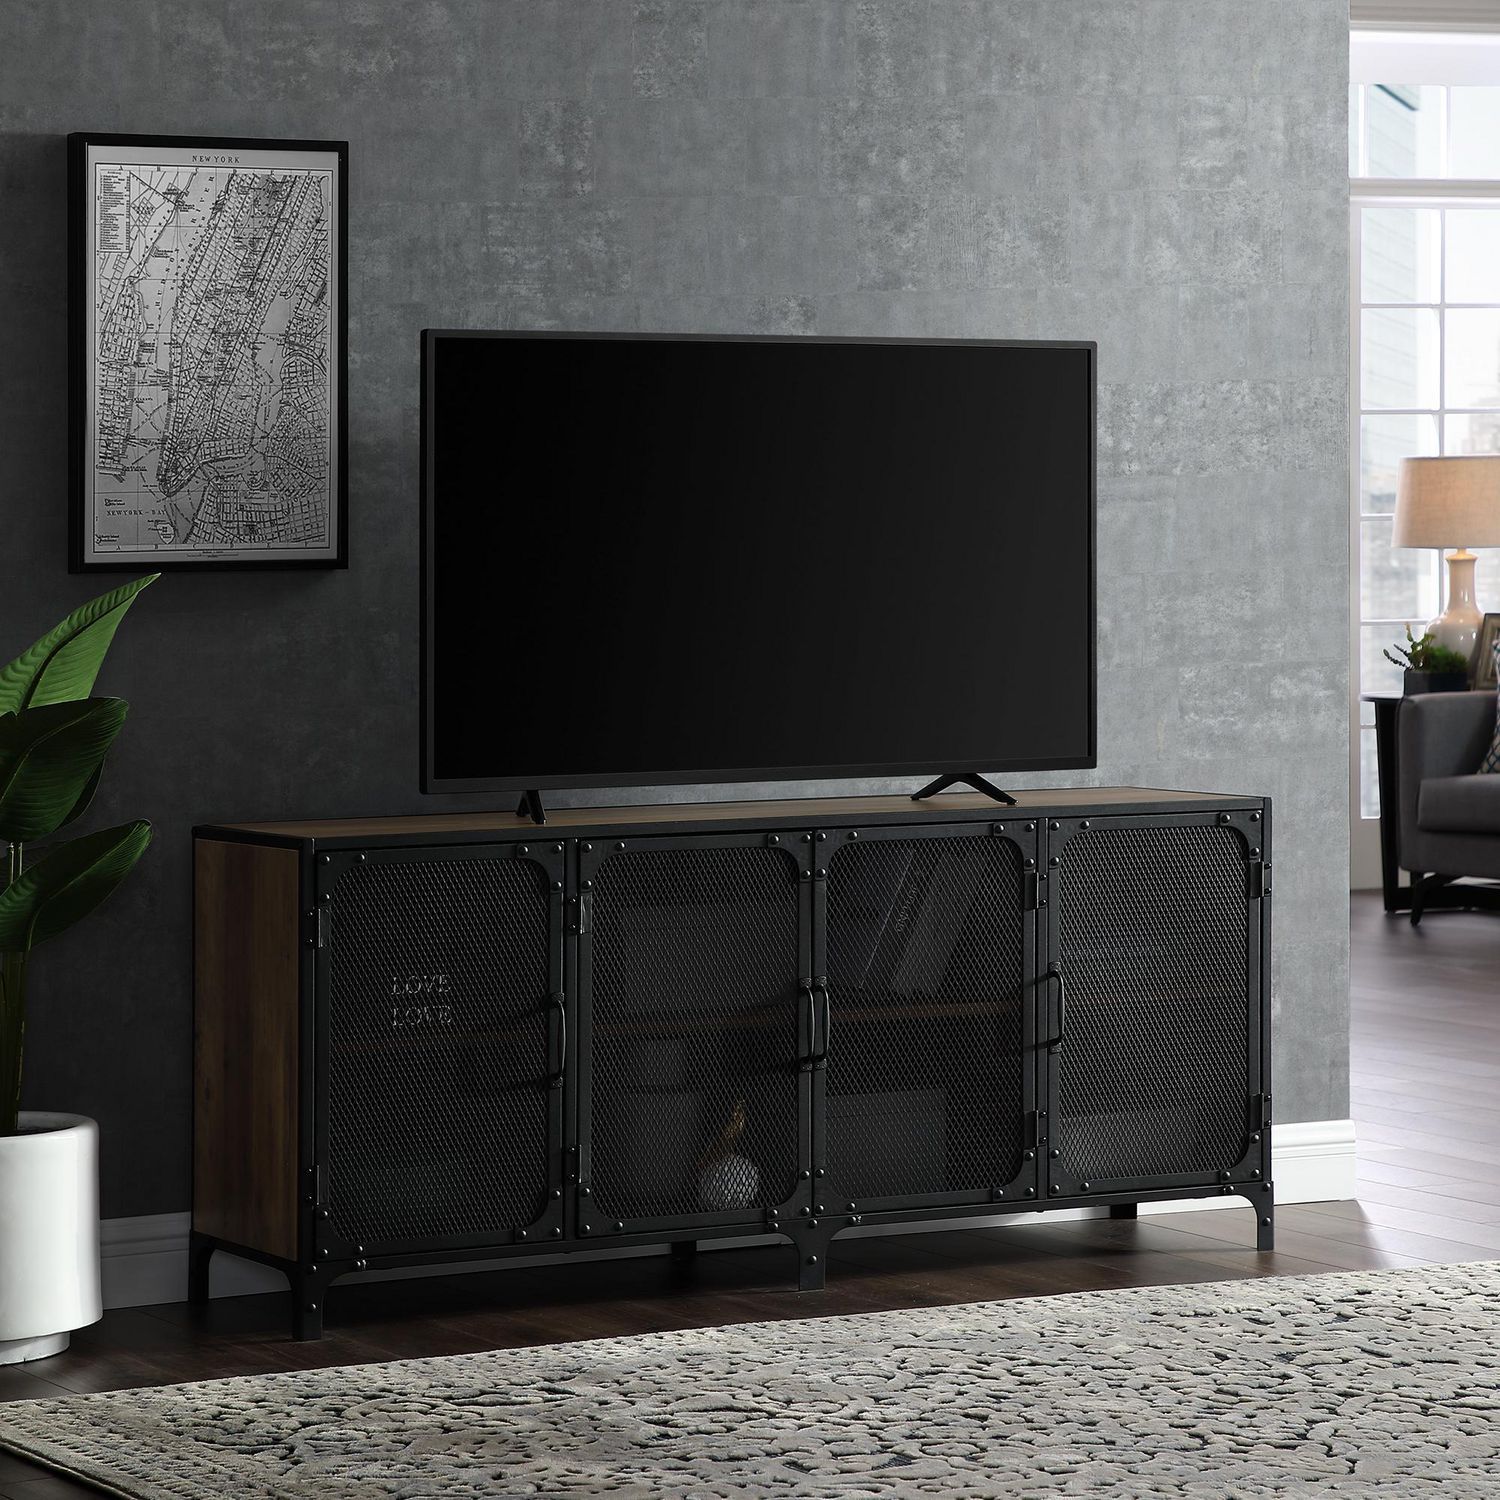 Manor Park Industrial Mesh Tv Stand For Tv's Up To 66 Within Urban Rustic Tv Stands (View 3 of 15)